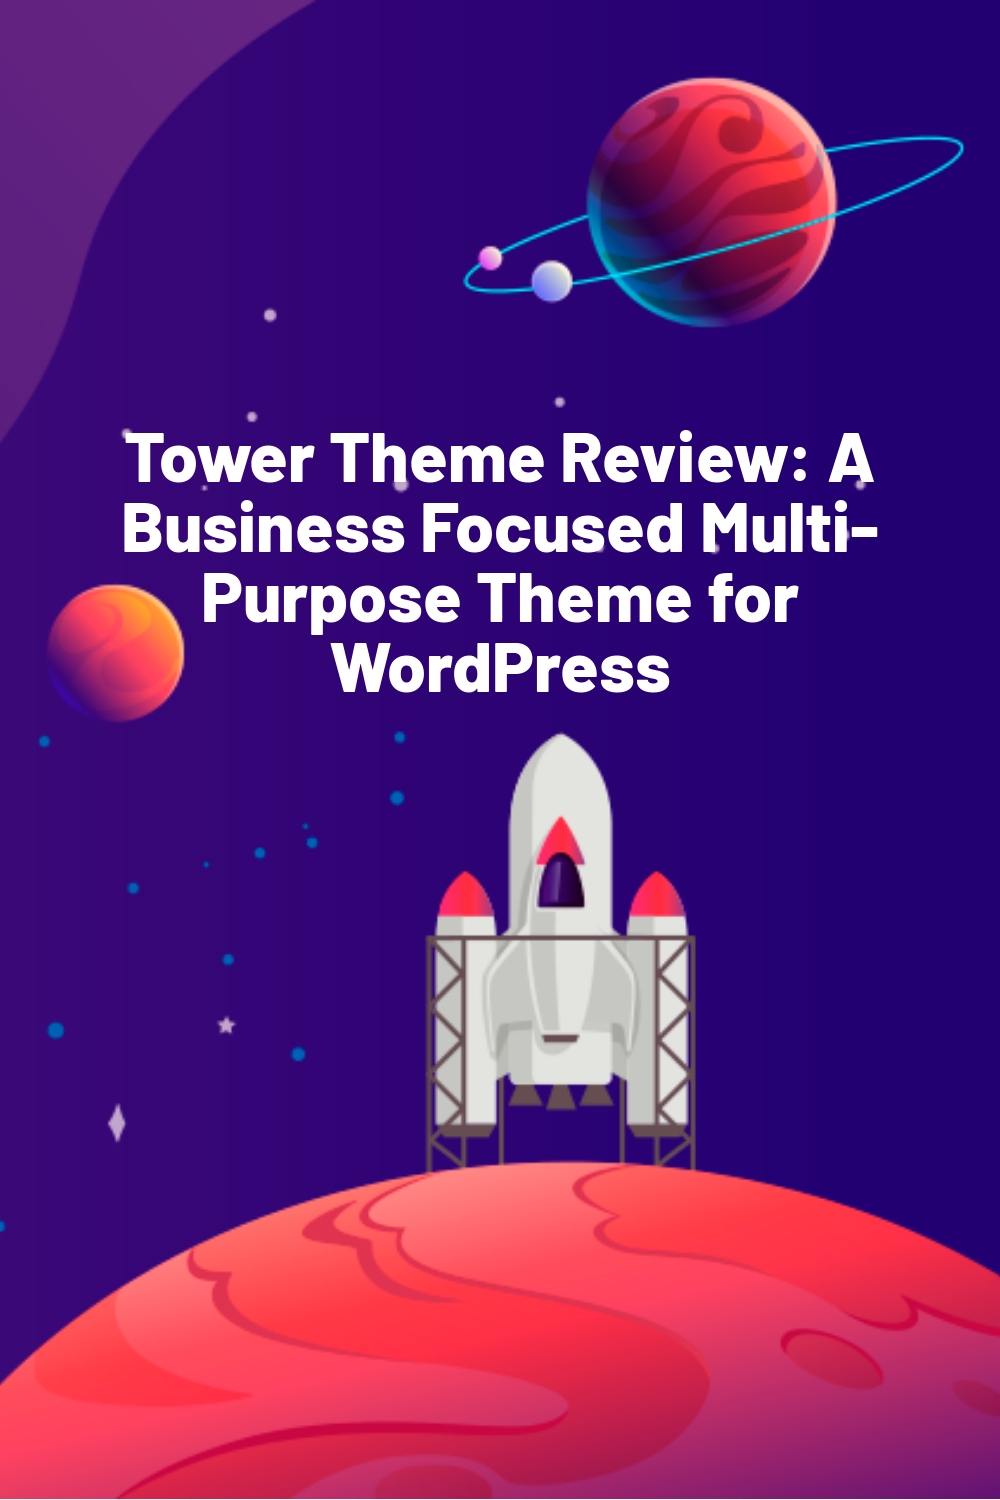 Tower Theme Review: A Business Focused Multi-Purpose Theme for WordPress